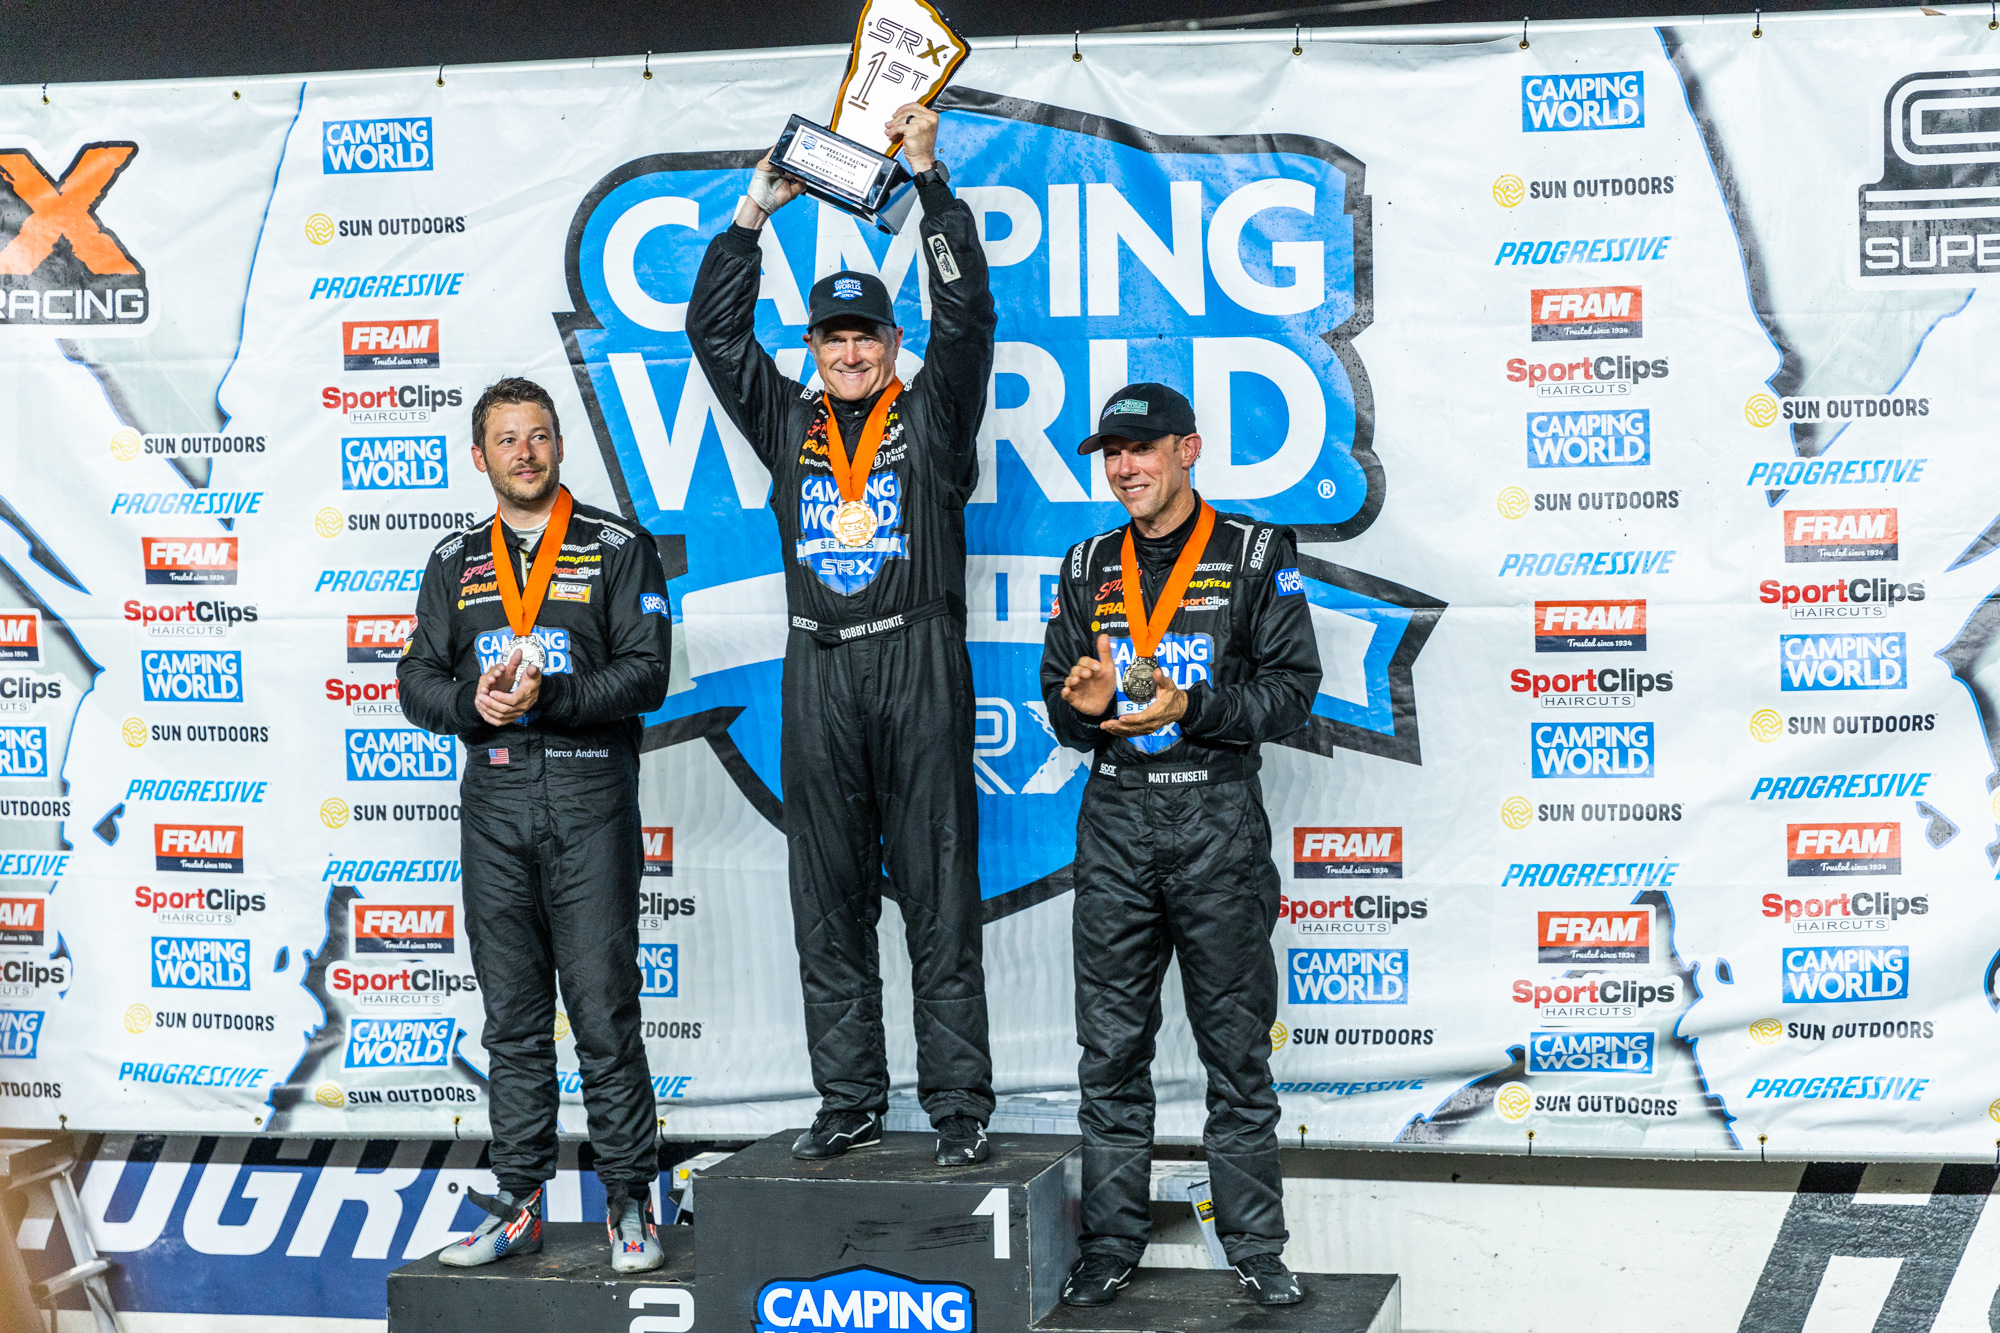 Labonte was on top of the podium with Andretti and Kenseth flanking him. (Photo: Eric Parks | The Podium Finish)